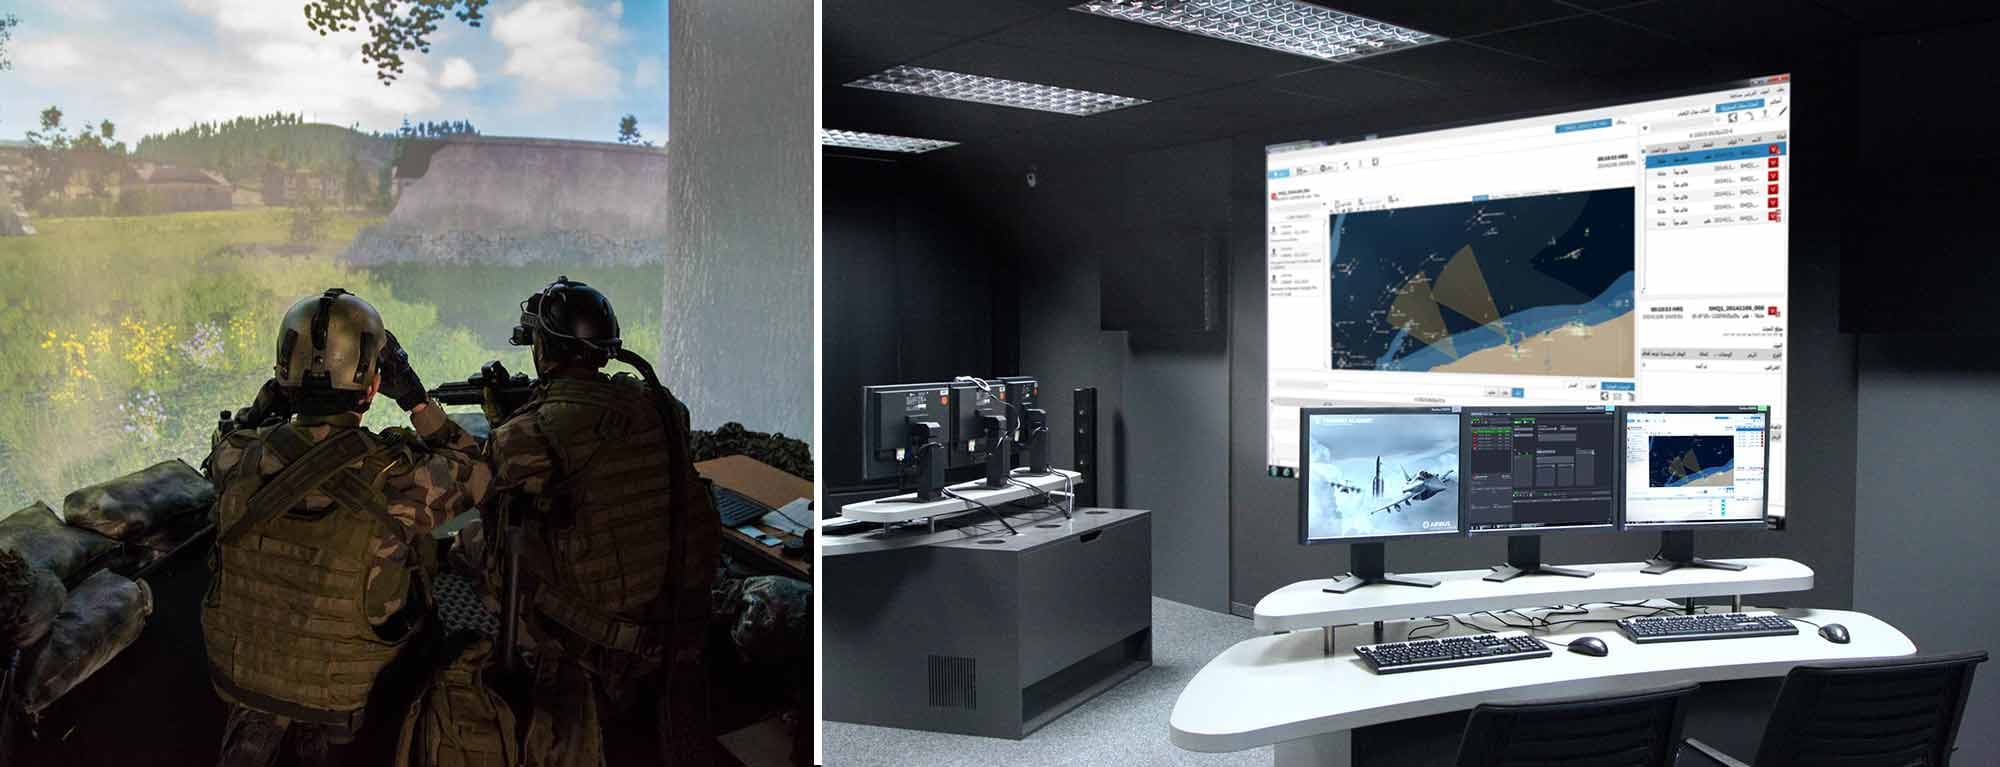 Airbus Intelligence provides really immersive simulations